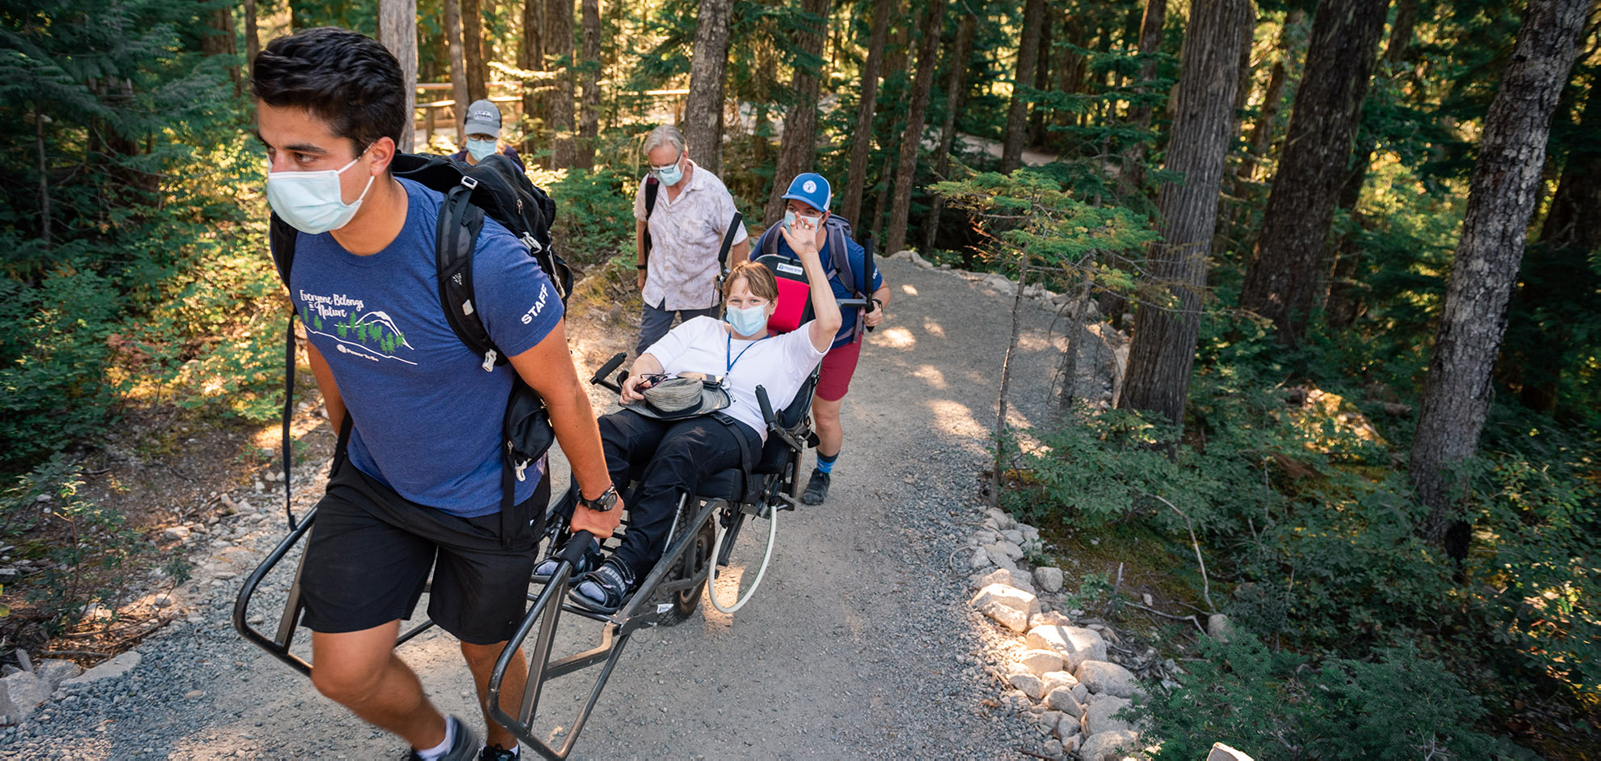 Group helping an off road wheelchair through a forest trail for adaptive recreation. 